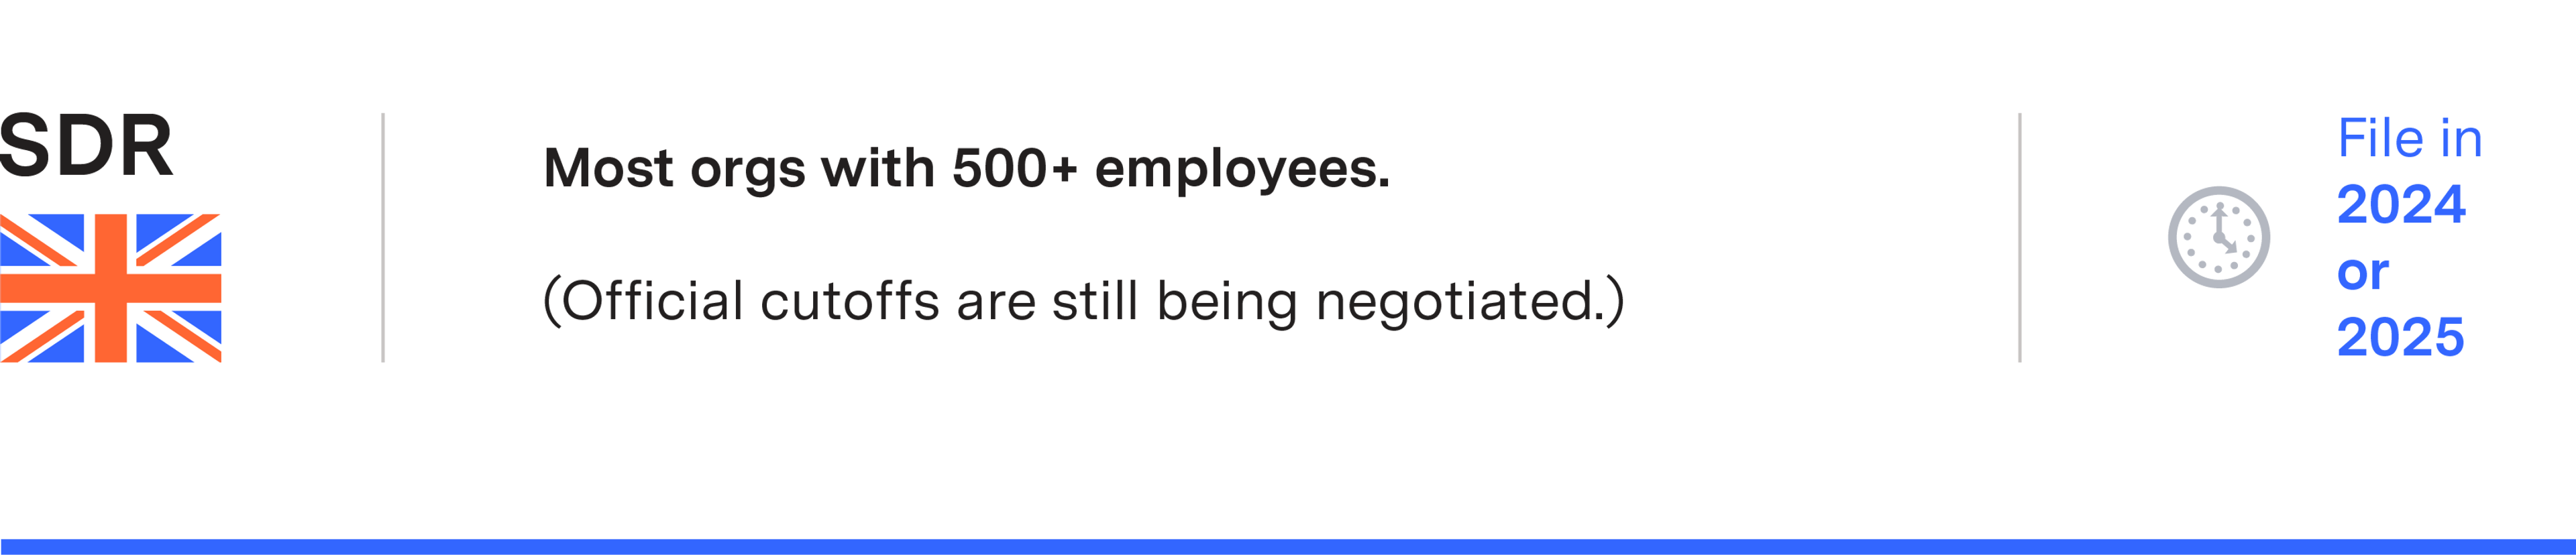 SDR requirement: Most orgs with 500+ employees. File in 2023 or 2024.